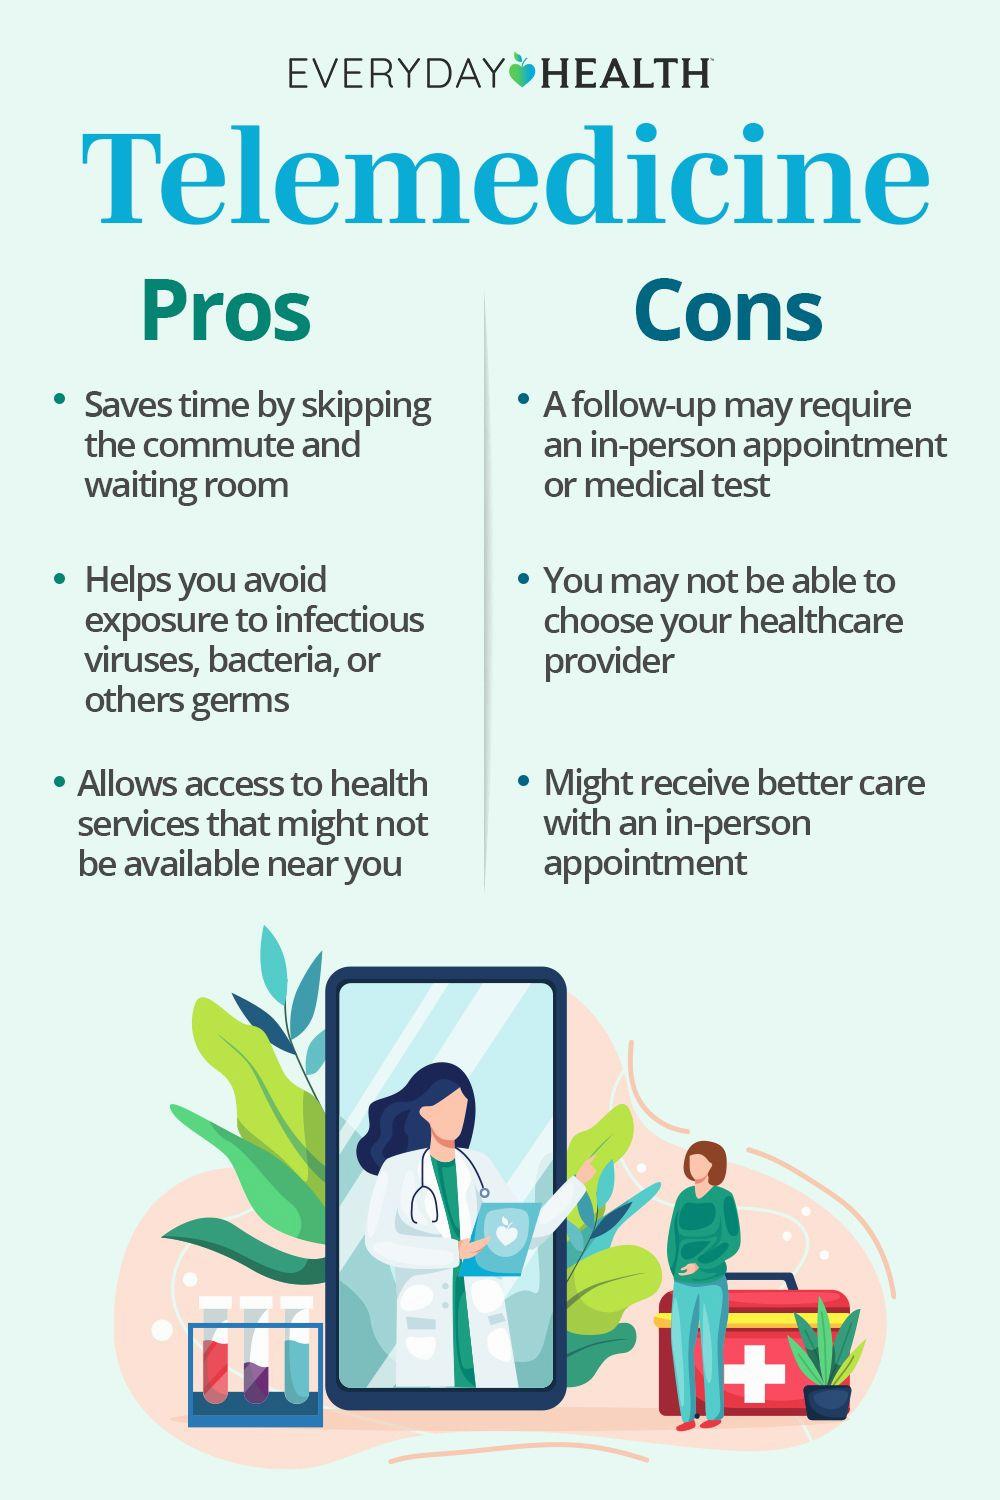 A comparison of the pros and cons of telemedicine.